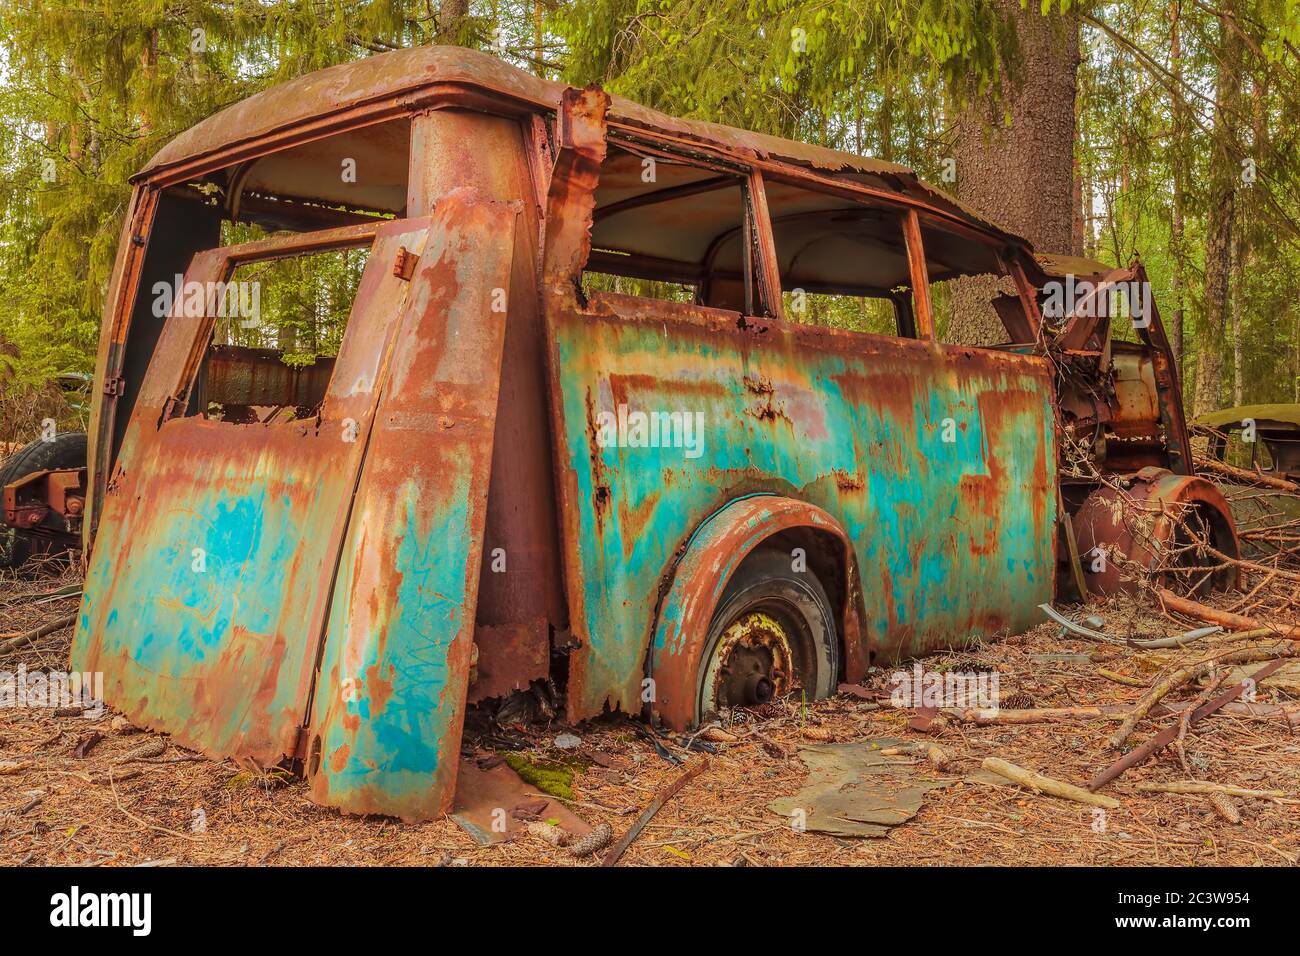 Wreck of a colorful rusted old transport bus in a forest Stock Photo